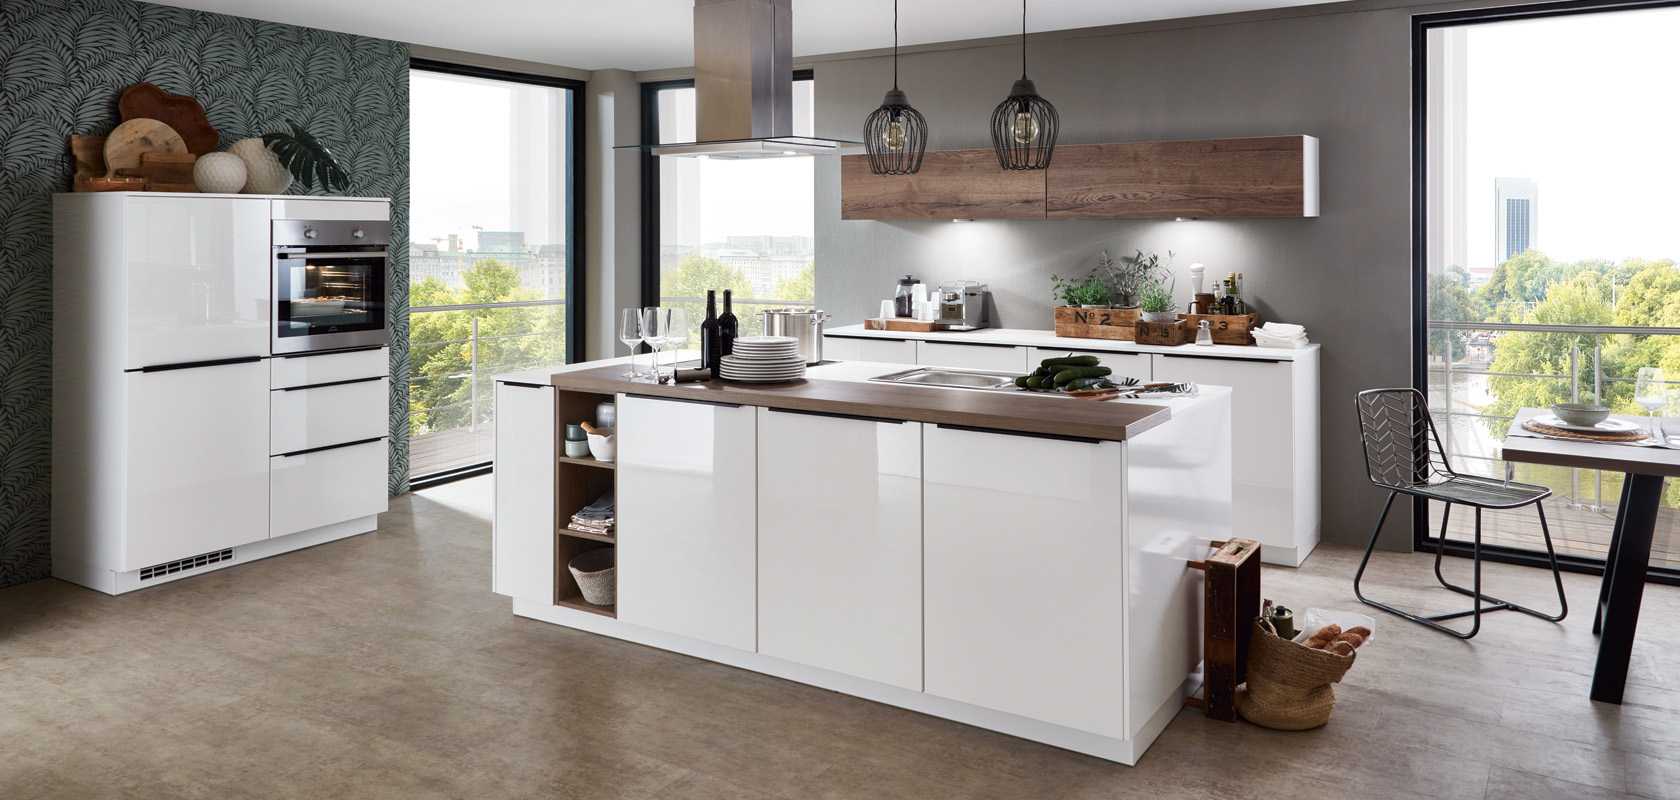 Modern kitchen interior featuring white cabinetry, integrated appliances, and a central island with a cooktop, set against a backdrop of large windows and greenery.